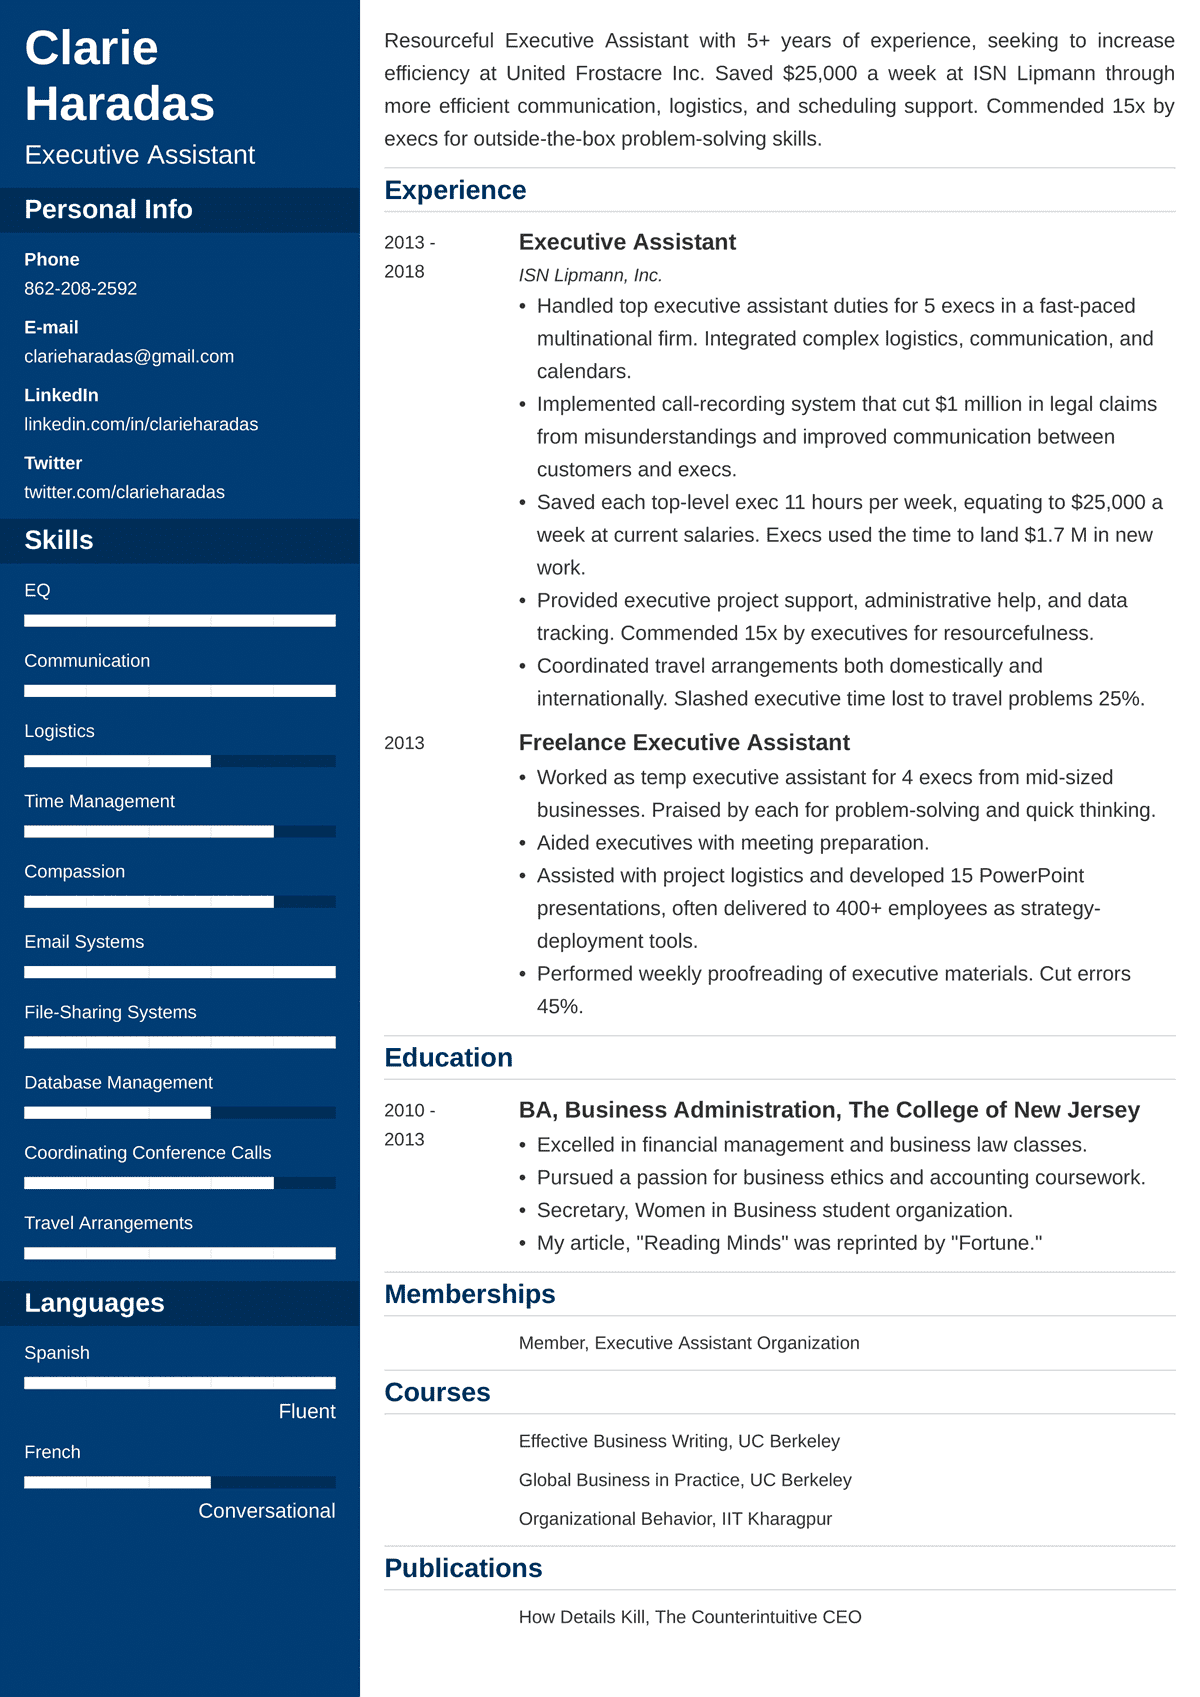 Executive Assistant CV Sample—20+ Examples and Writing Tips